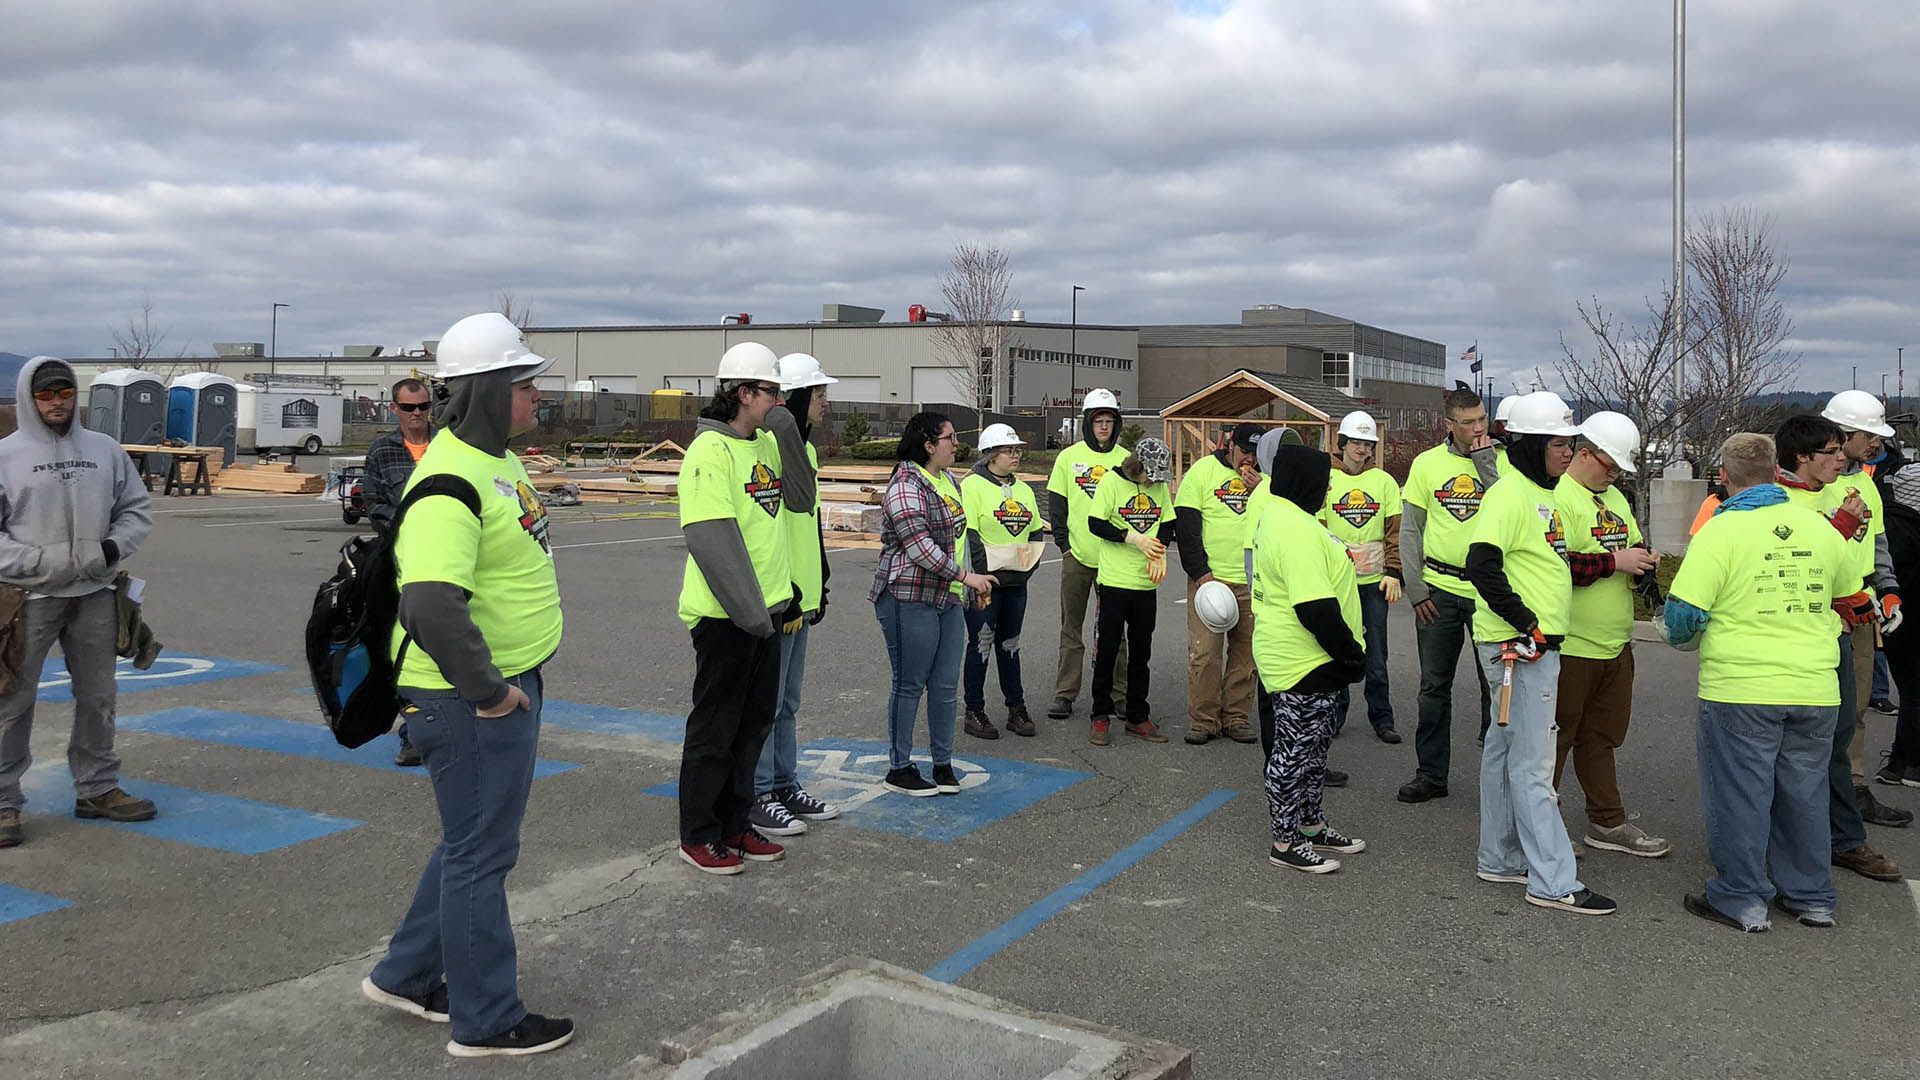 A group of young people in construction combine shirts and hardhats learning about construction